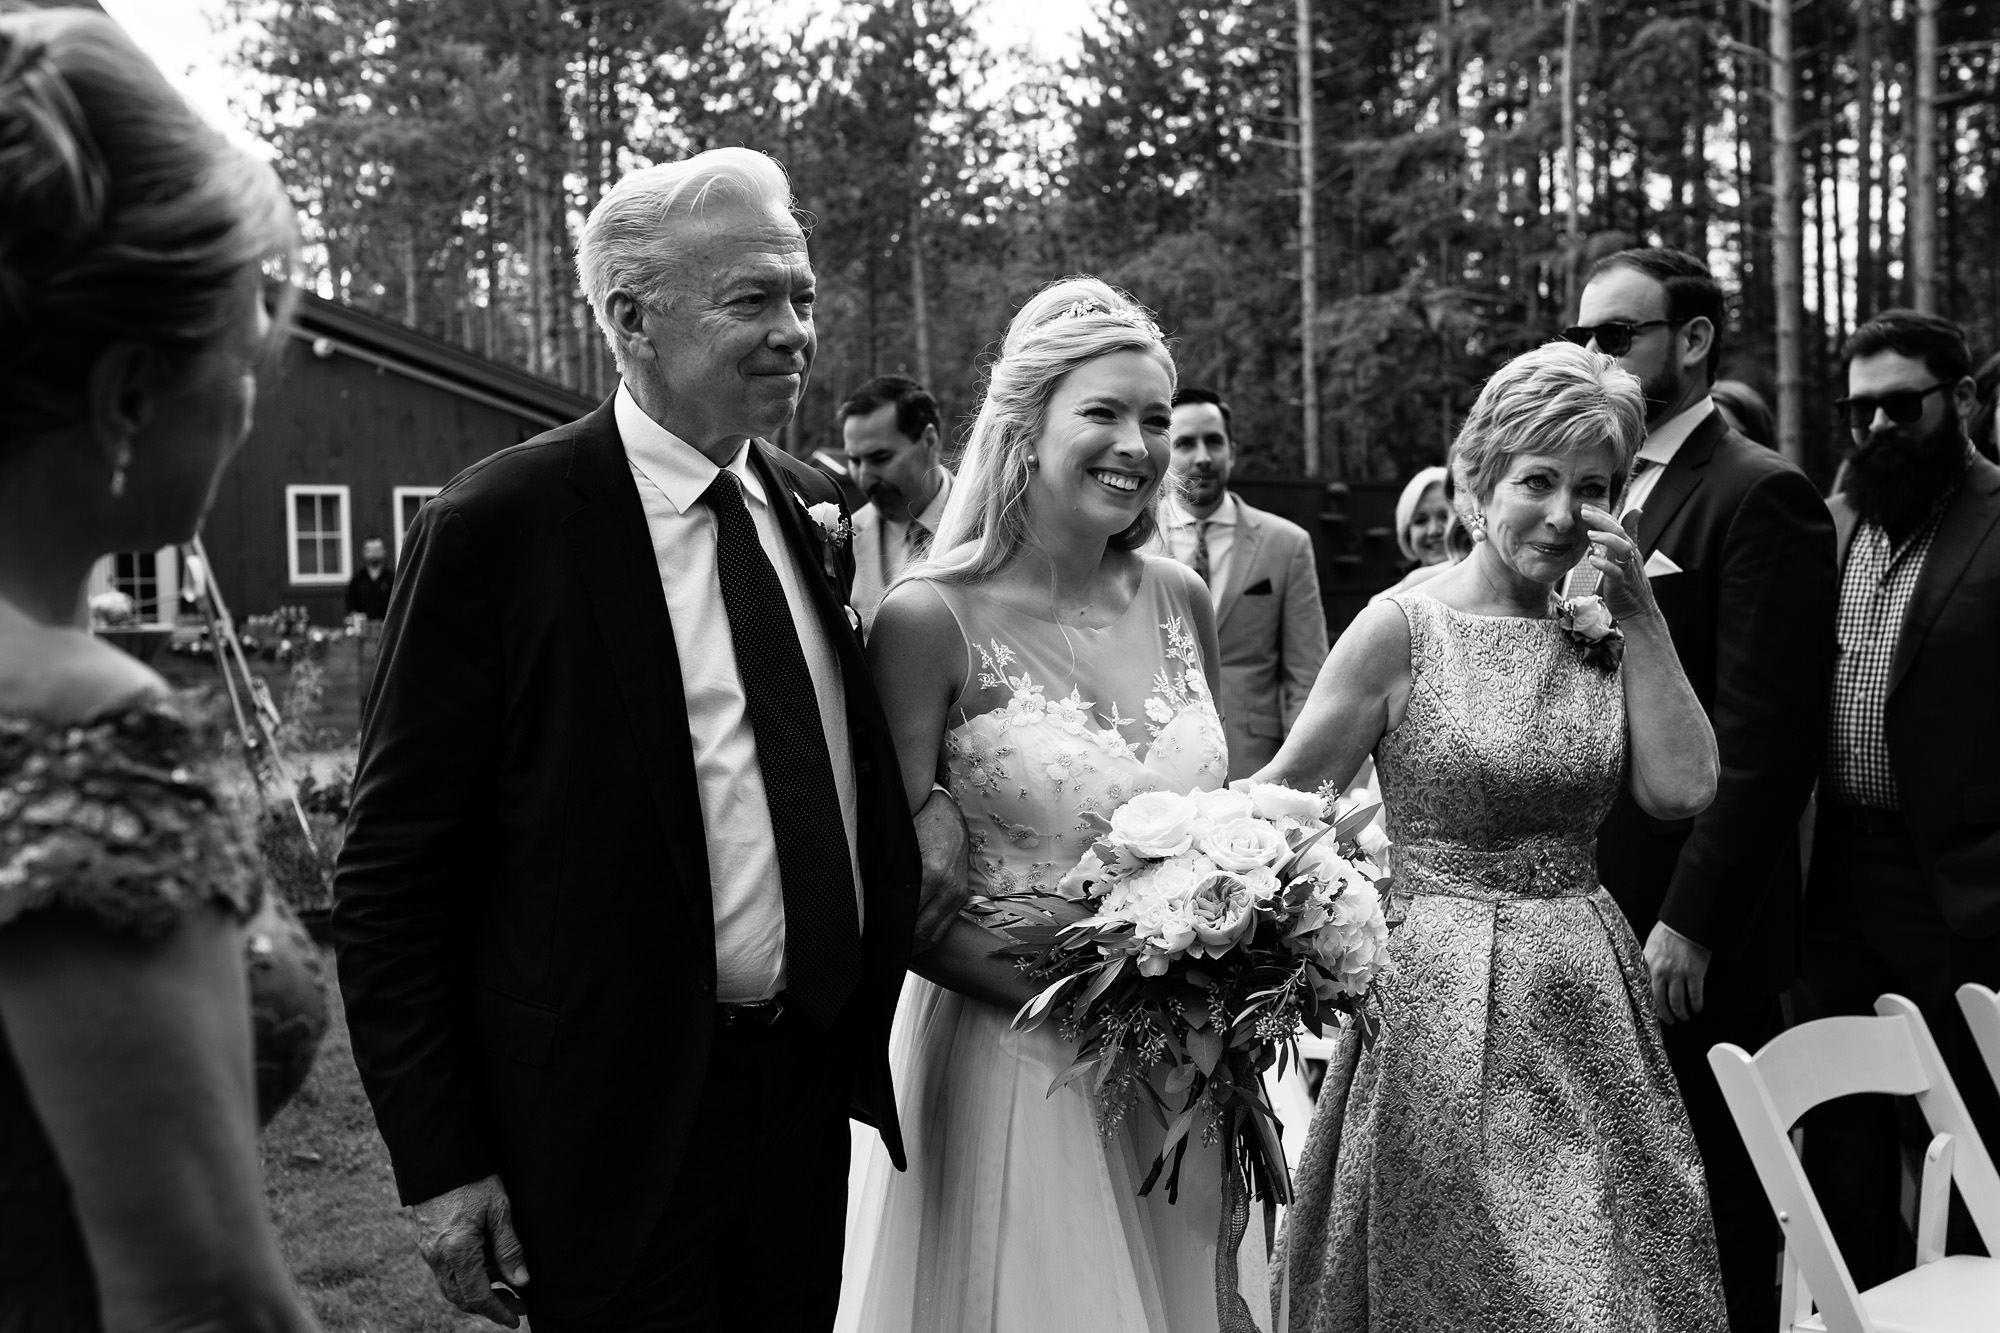 Documentary wedding photos of a Hidden Pond wedding ceremony in southern Maine